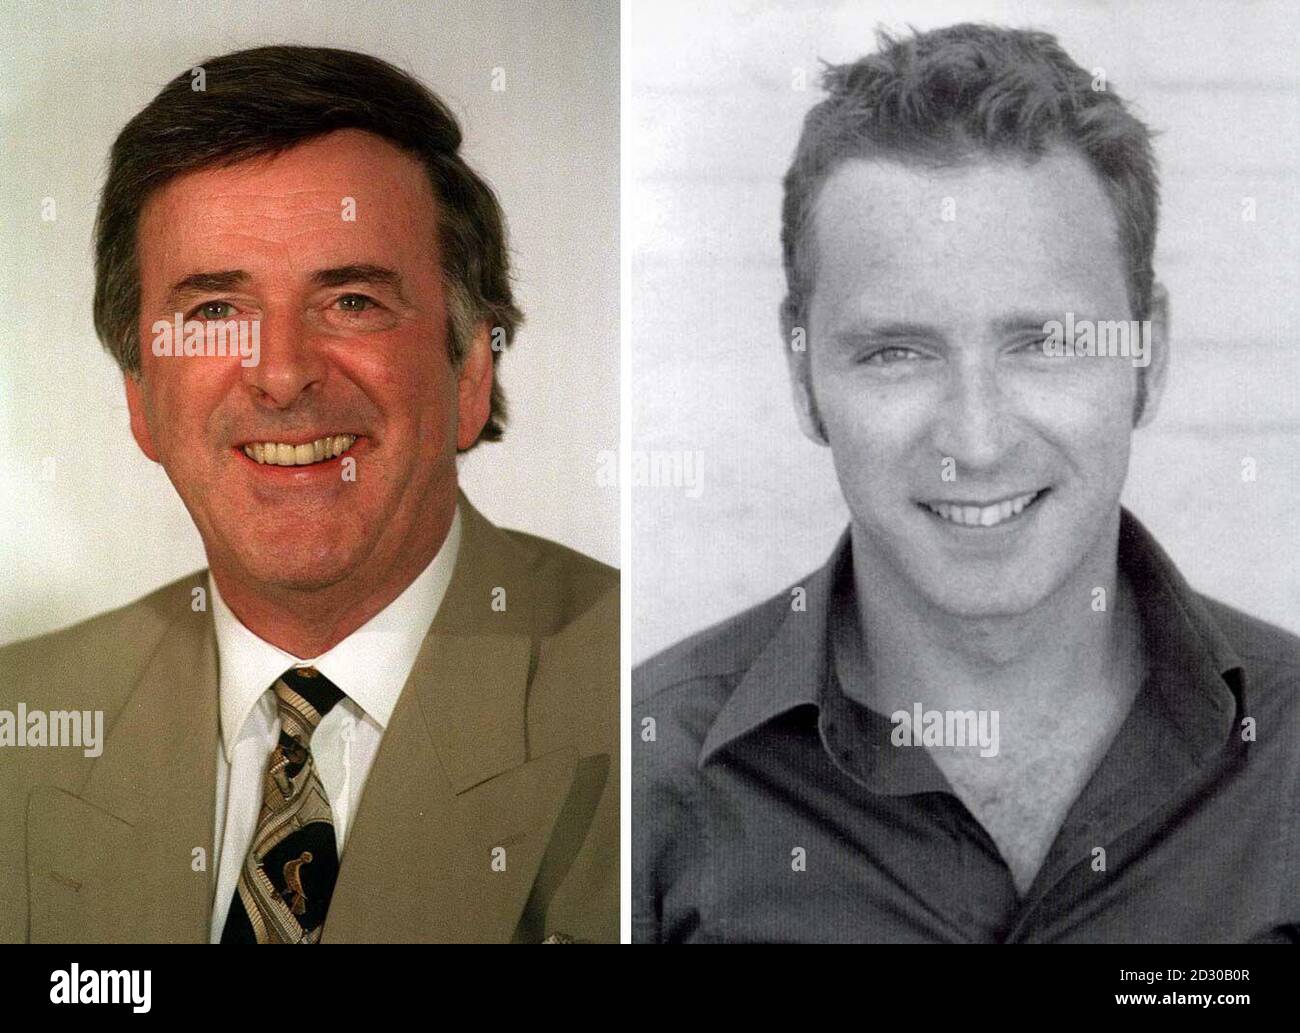 Terry Wogan (L) and his son Mark.  Terry Wogan, a veteran of British radio broadcasting, was facing a new rival his son.  Terry, 60, will be pitched against 28 year old Mark when they present flagship breakfast radio programmes on rival stations.   * Mark will host the 7-10am breakfast show on Liberty Radio, as stand-in for regular holiday presenter Toby Anstis, while Terry presents Wake Up to Wogan on Radio 2 from 7.30-9.15am. Stock Photo